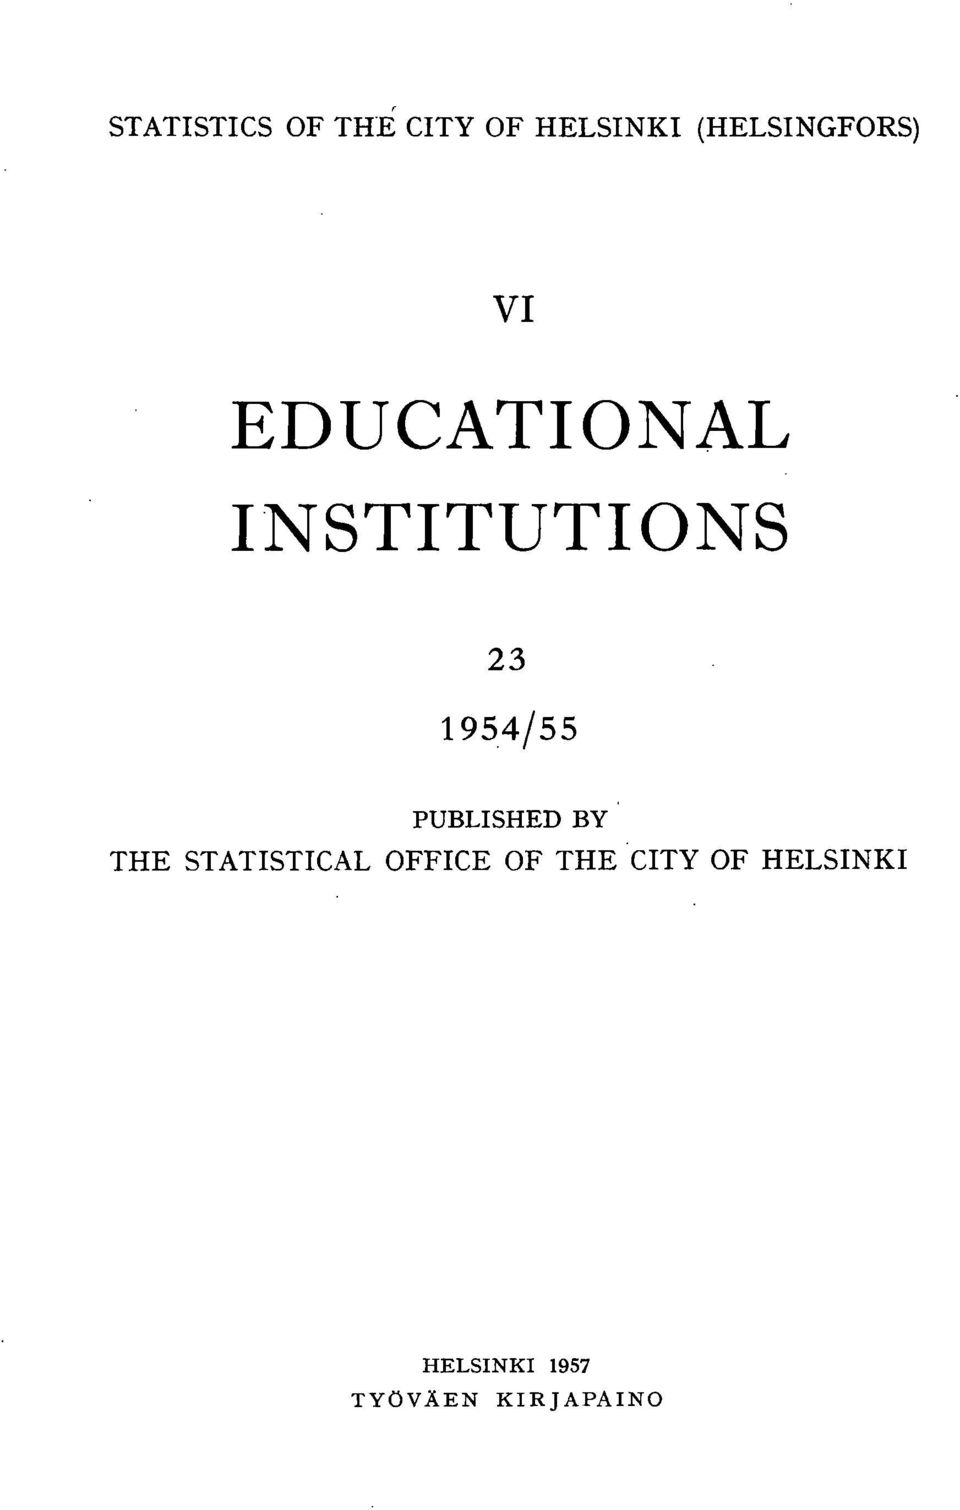 95/55 PUBLISHED BY THE STATISTICAL OFFICE